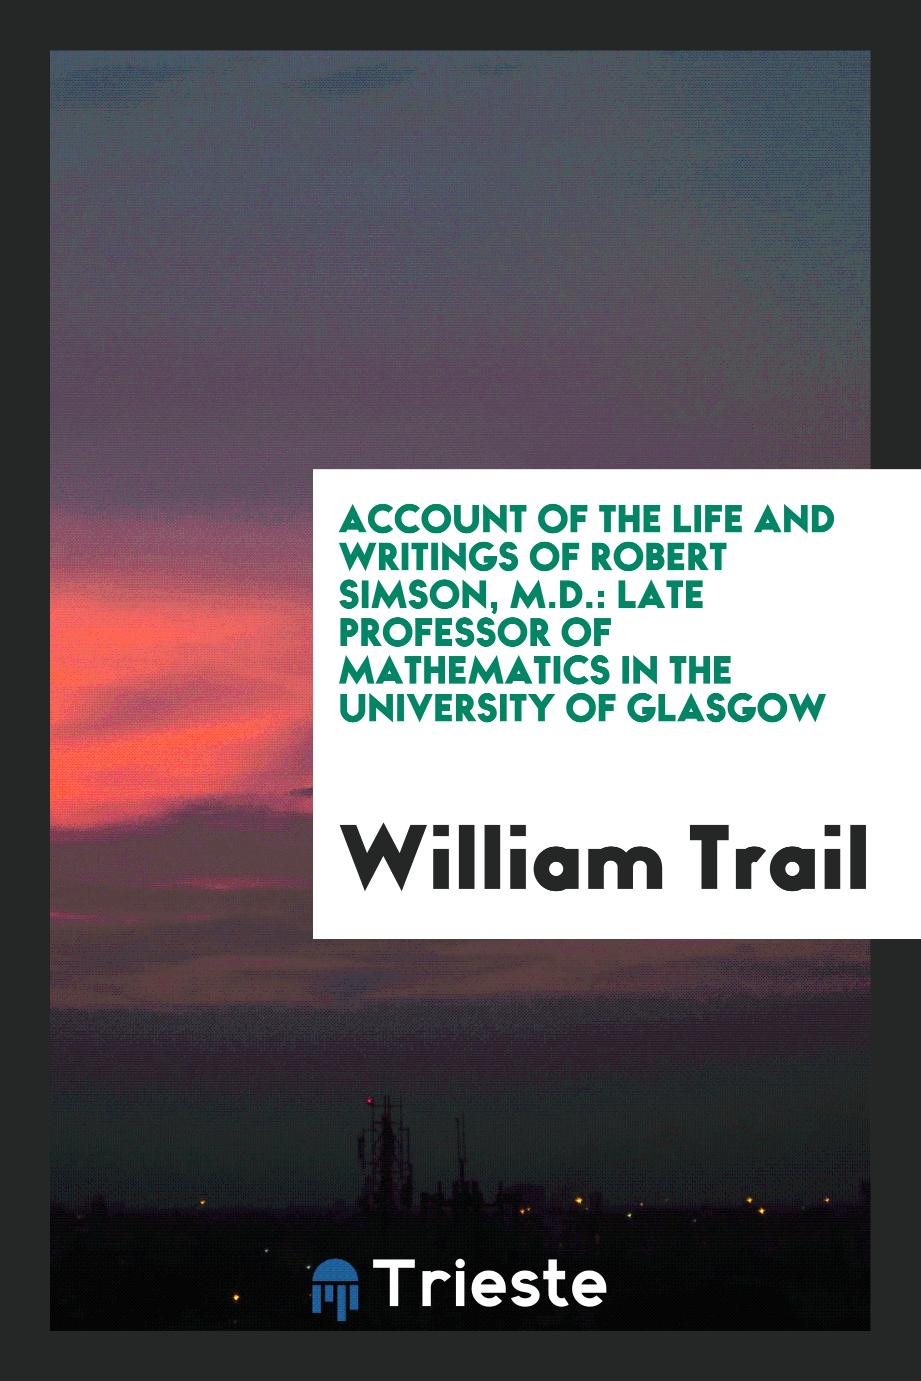 Account of the Life and Writings of Robert Simson, M.D.: Late Professor of Mathematics in the University of Glasgow